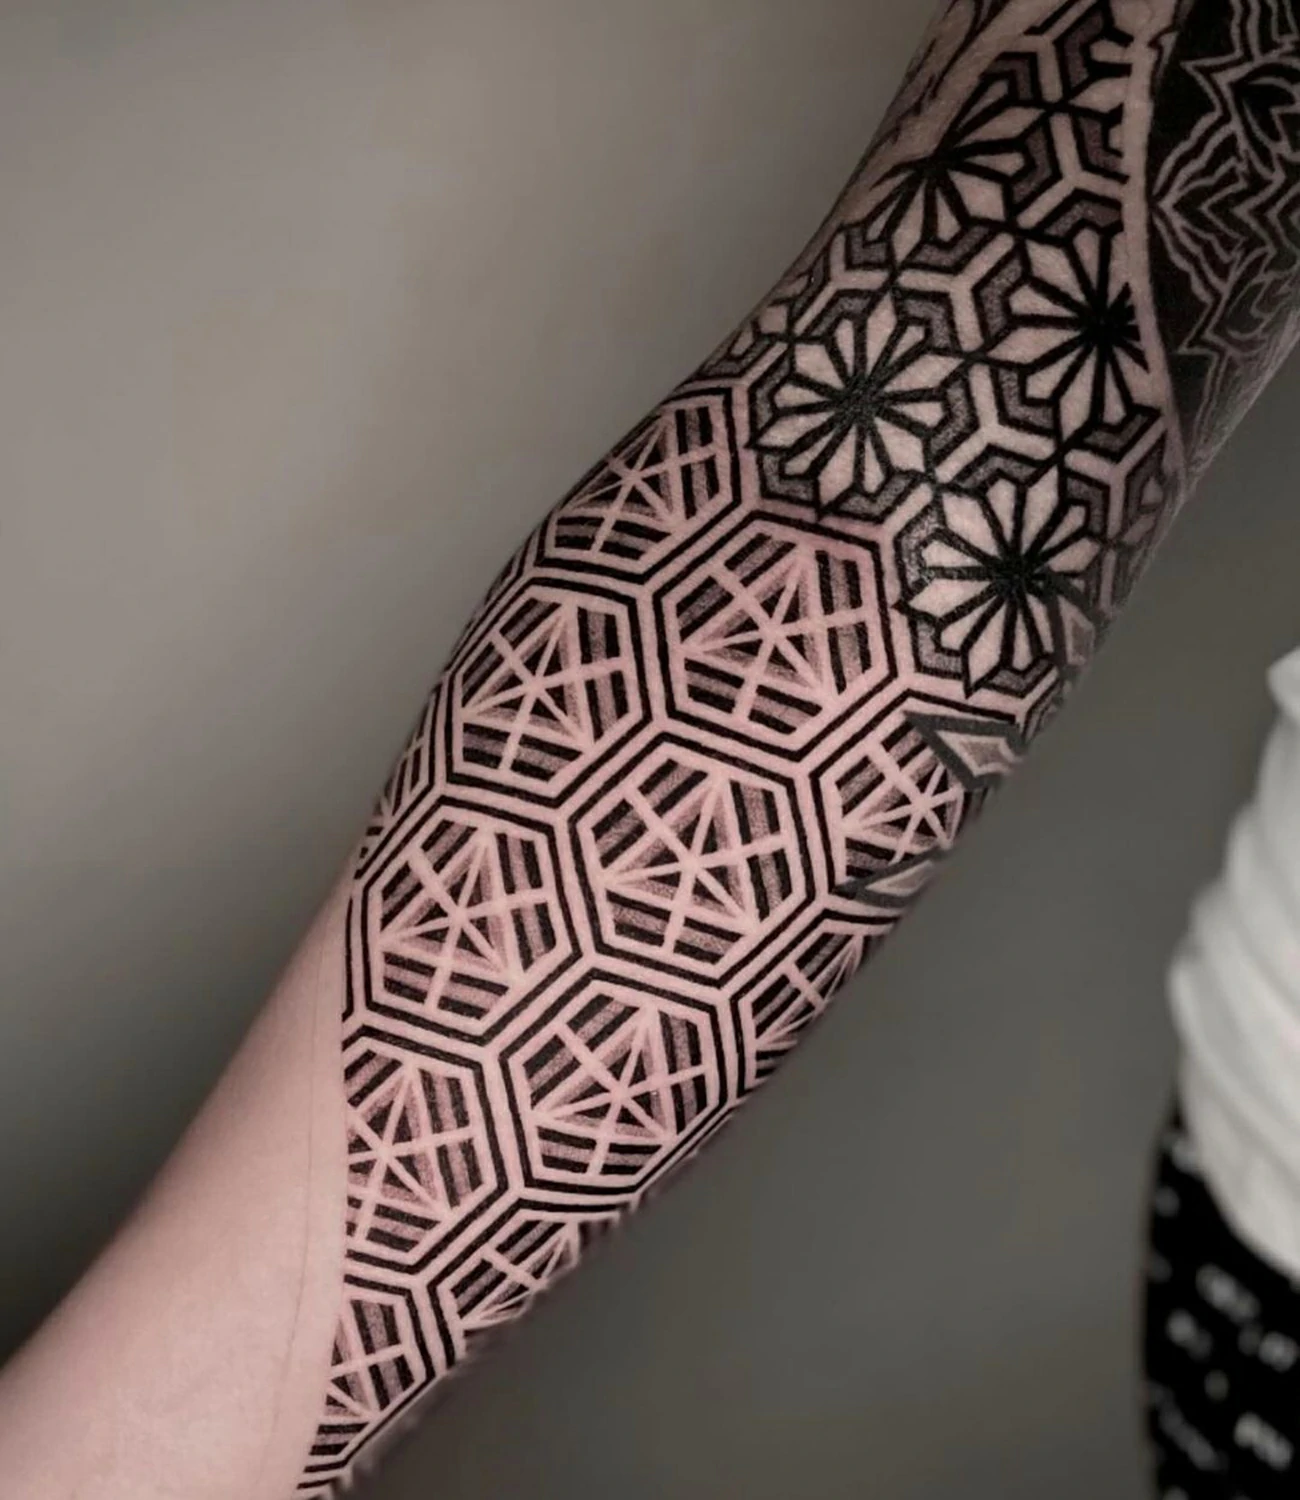 Geometric Tattoo Patterns: Geometric tattoo patterns consist of repetitive shapes arranged meticulously to create balanced and visually appealing tattoos.